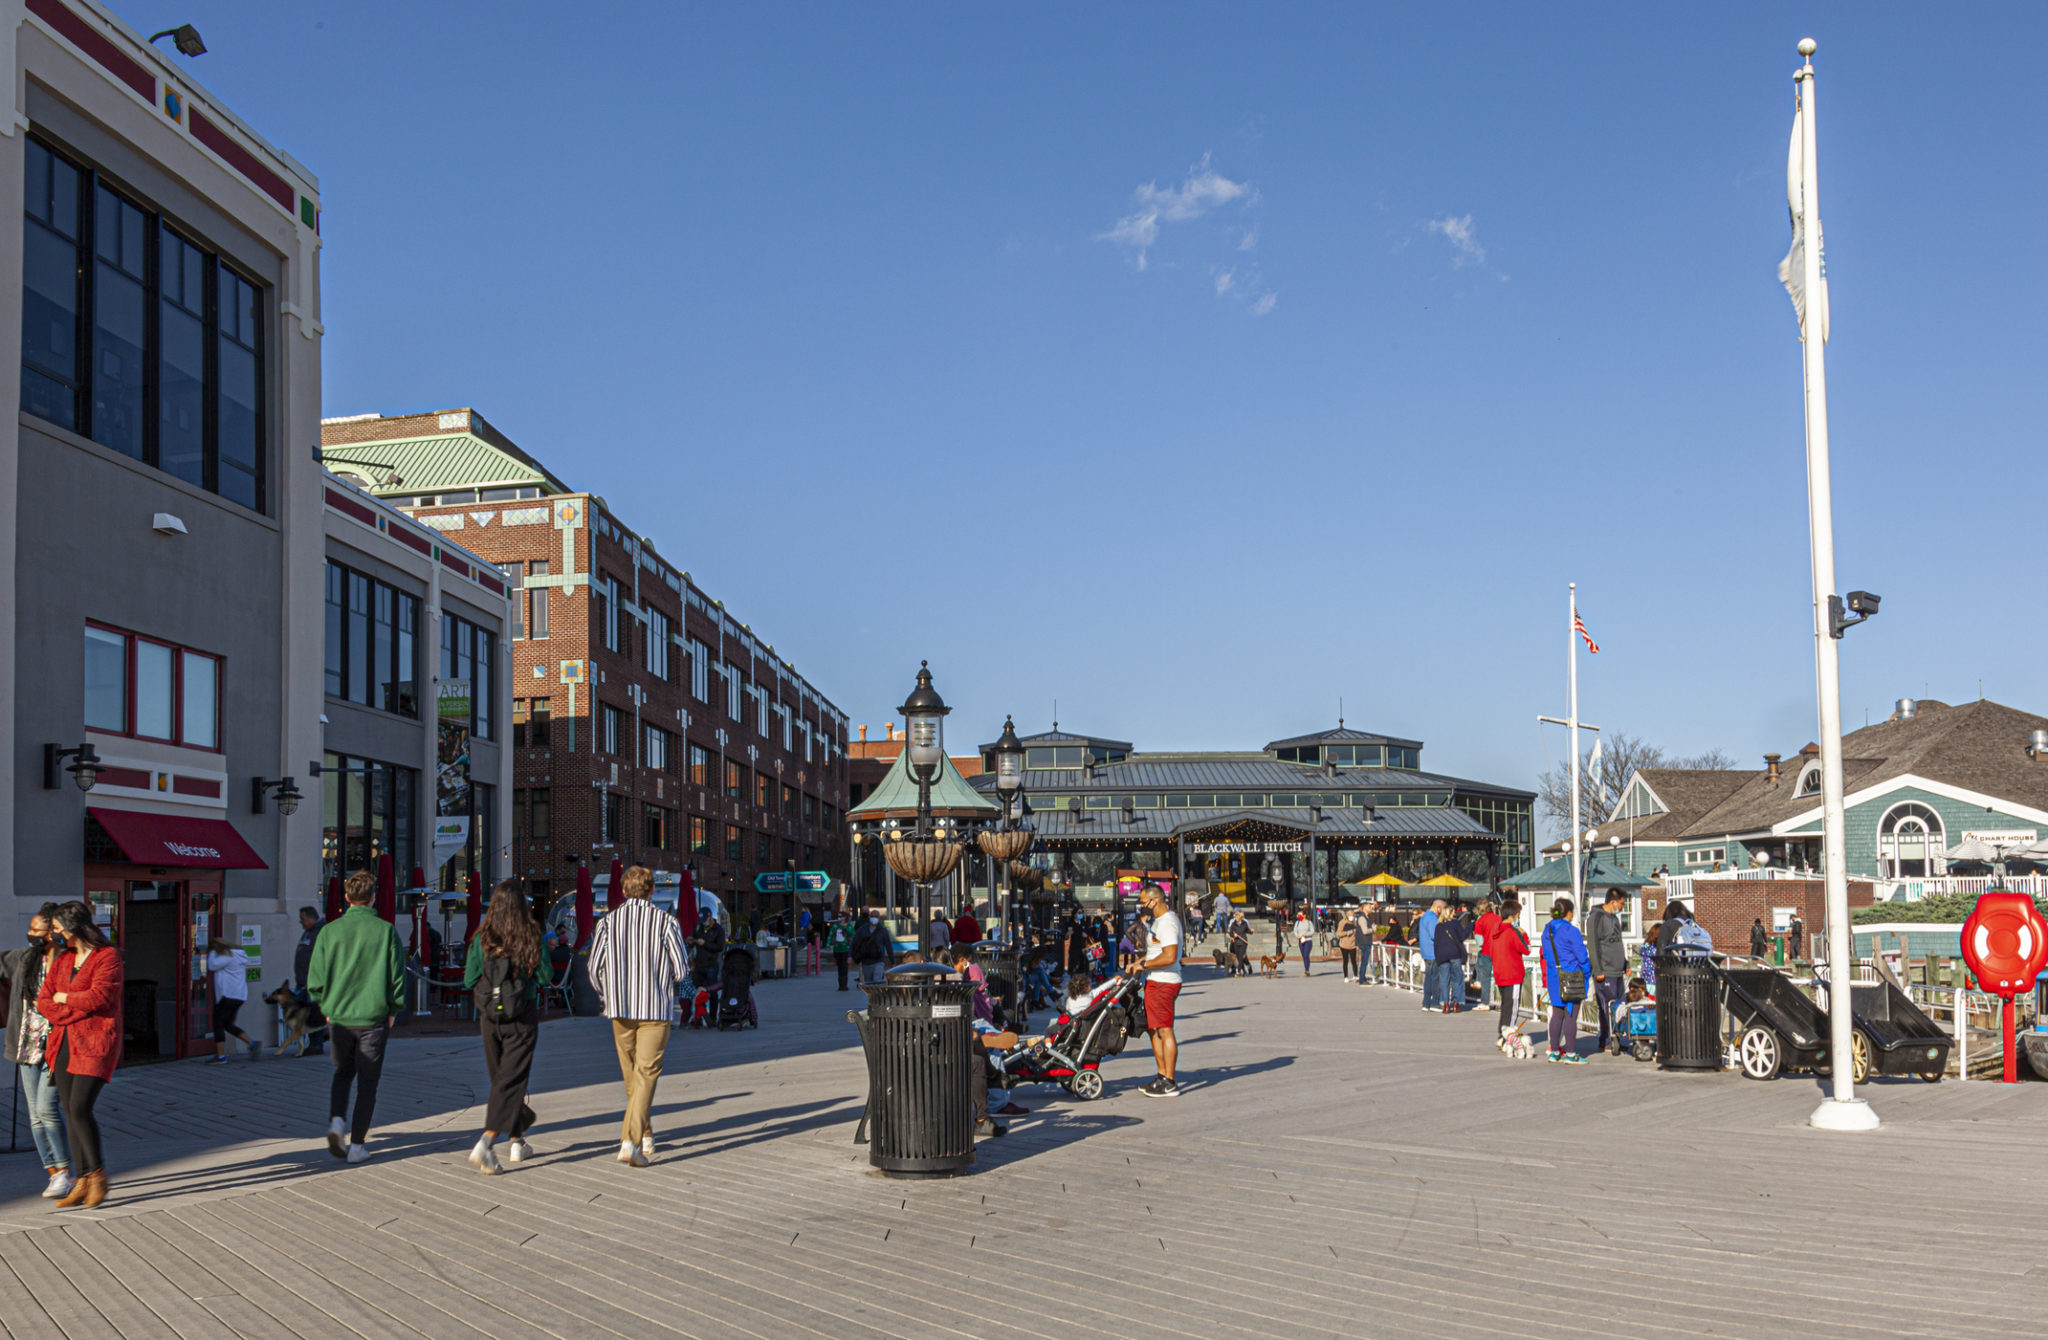 The pedestrian-only waterfront in Old Town Alexandria. (Photo licensed to The Zebra Press by istockphoto.com)